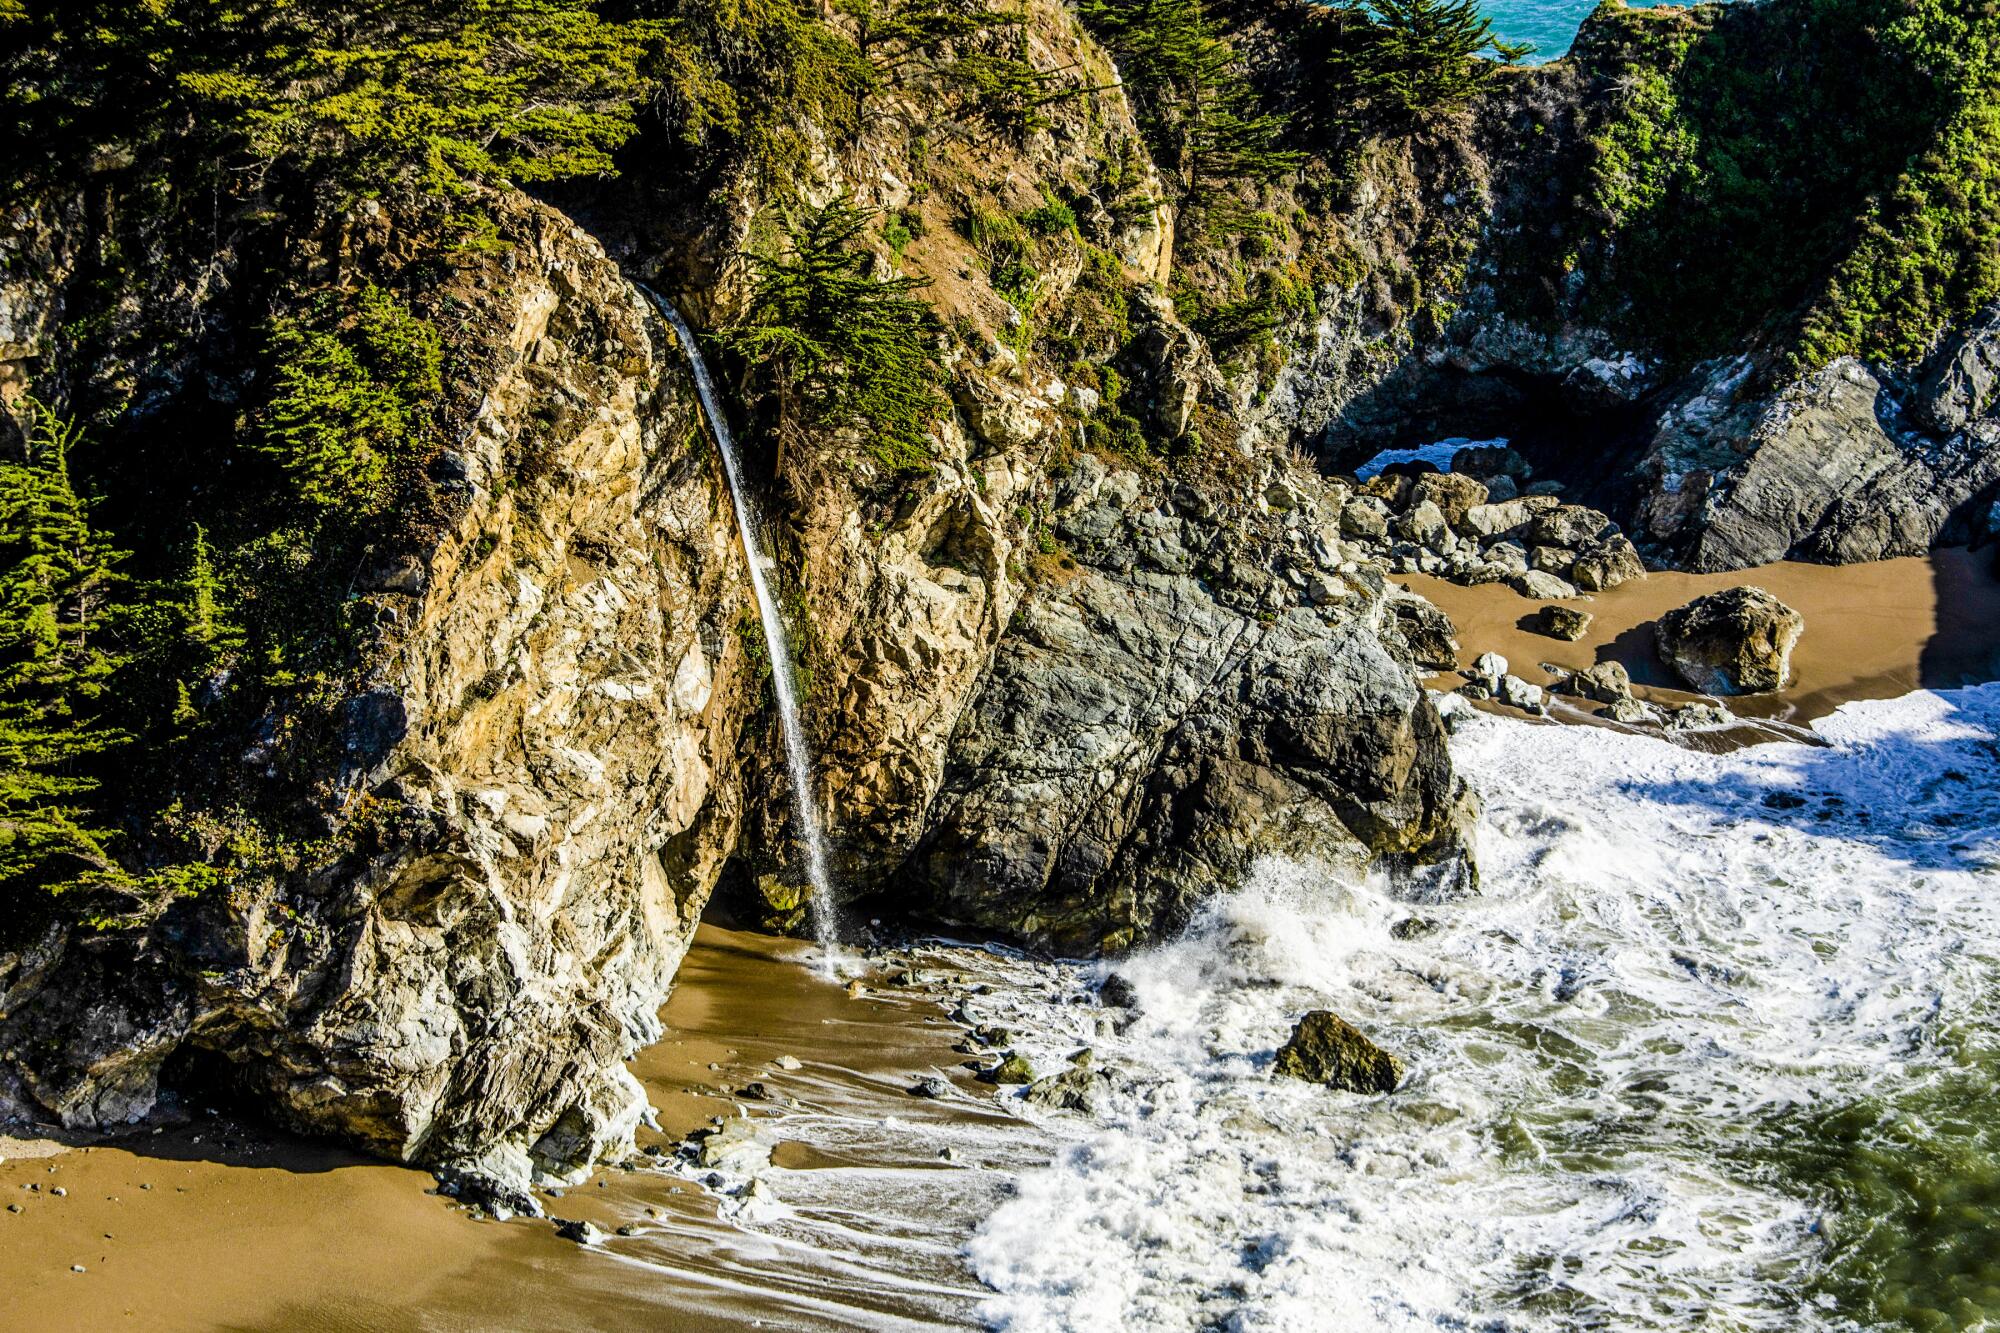 McWay Falls drops over an 80-foot cliff onto the beach, with waves lapping at the base of the cliff.